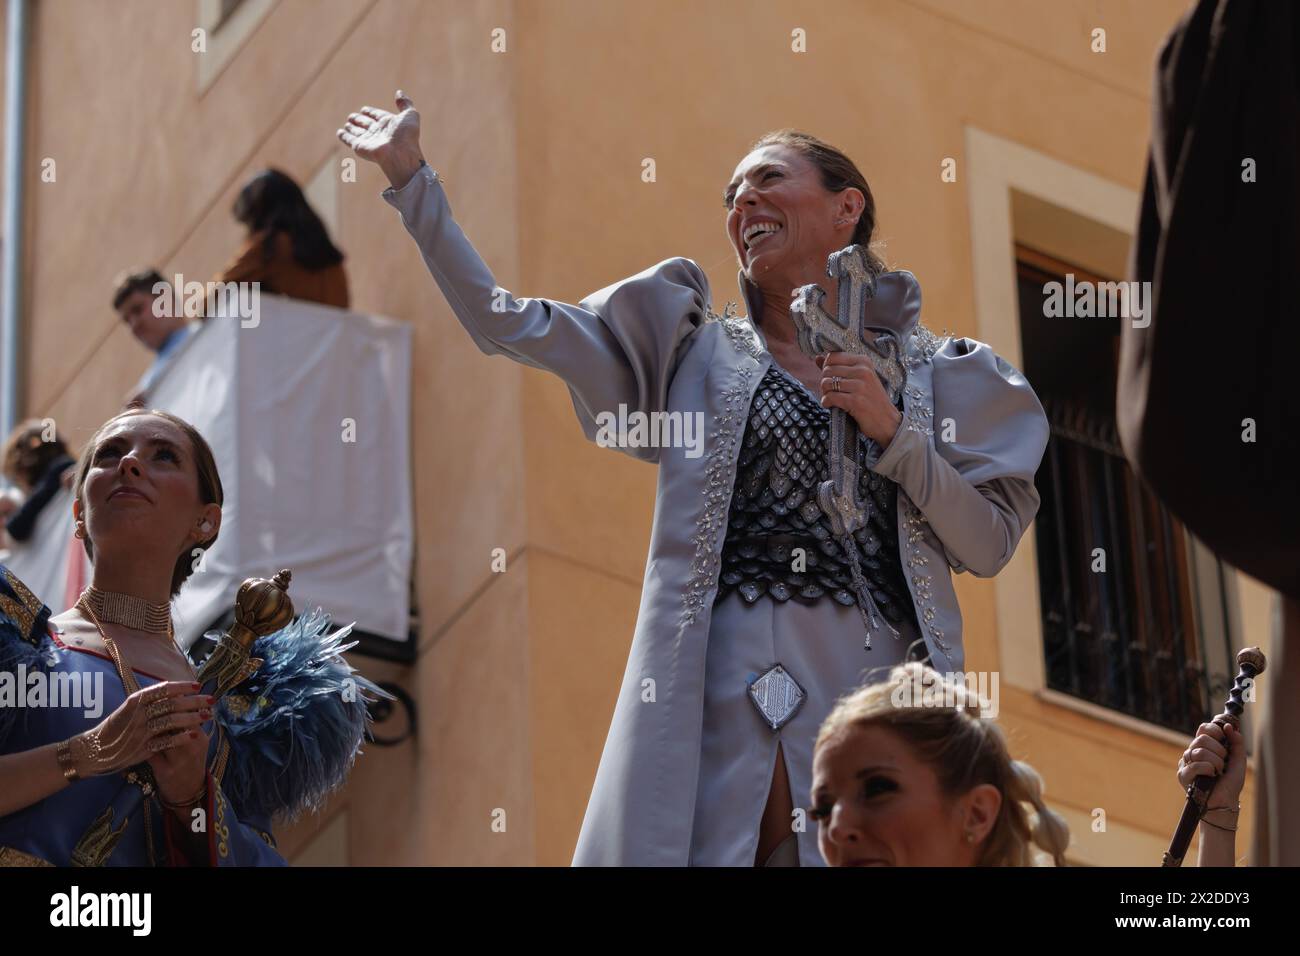 04-20-2024, Alcoy, Spain: Favorite woman of the ensign of the Aragoneses troupe smiling and waving during the Moors and Christians parade. Popular fes Stock Photo